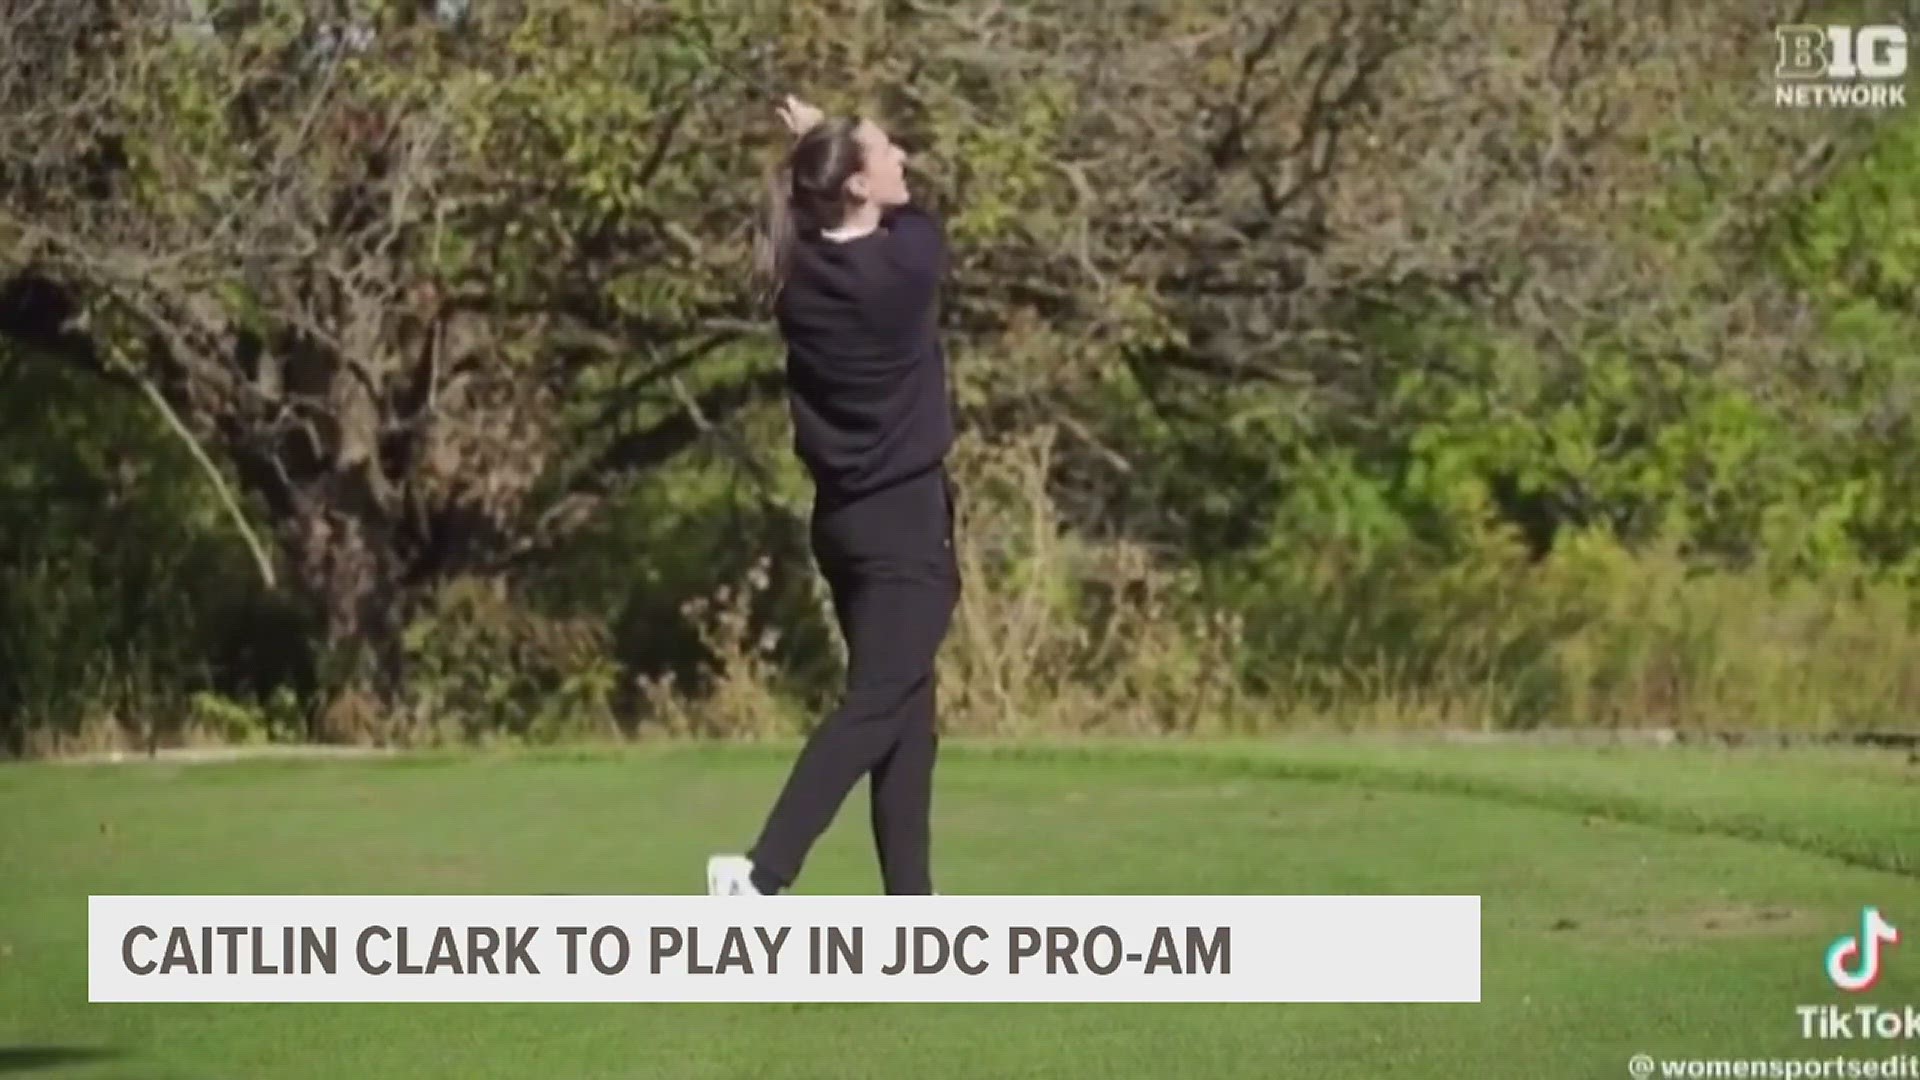 The reigning Women's College Basketball National Player of the Year, Iowa's Caitlin Clark will be playing in the John Deere Classic Pro-Am Tournament this year.